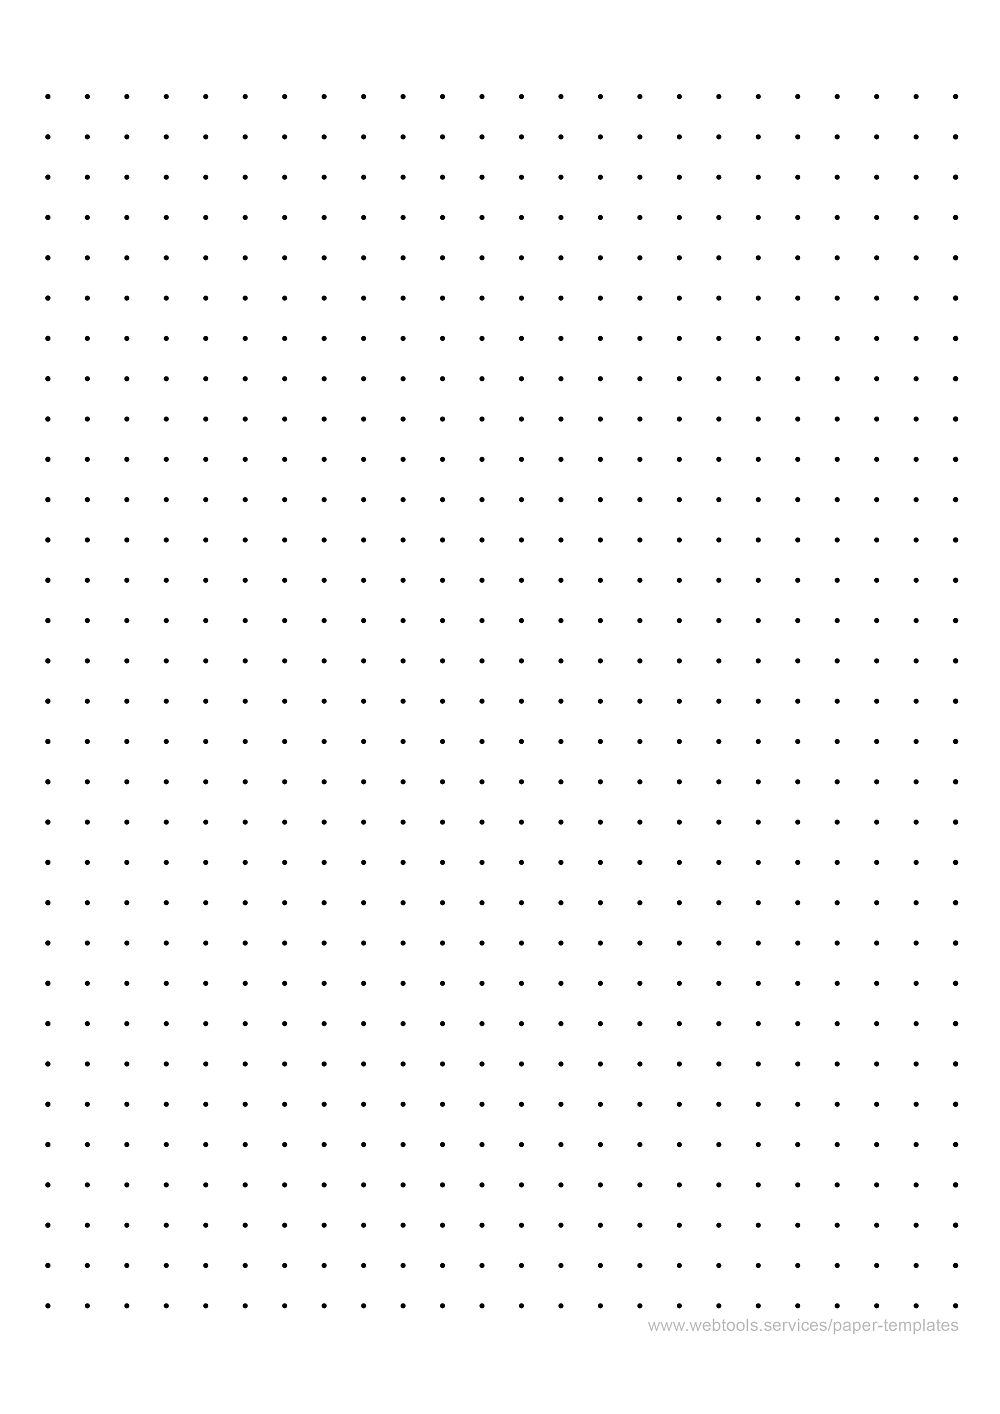 Dotted Paper - Three Dots Per Inch